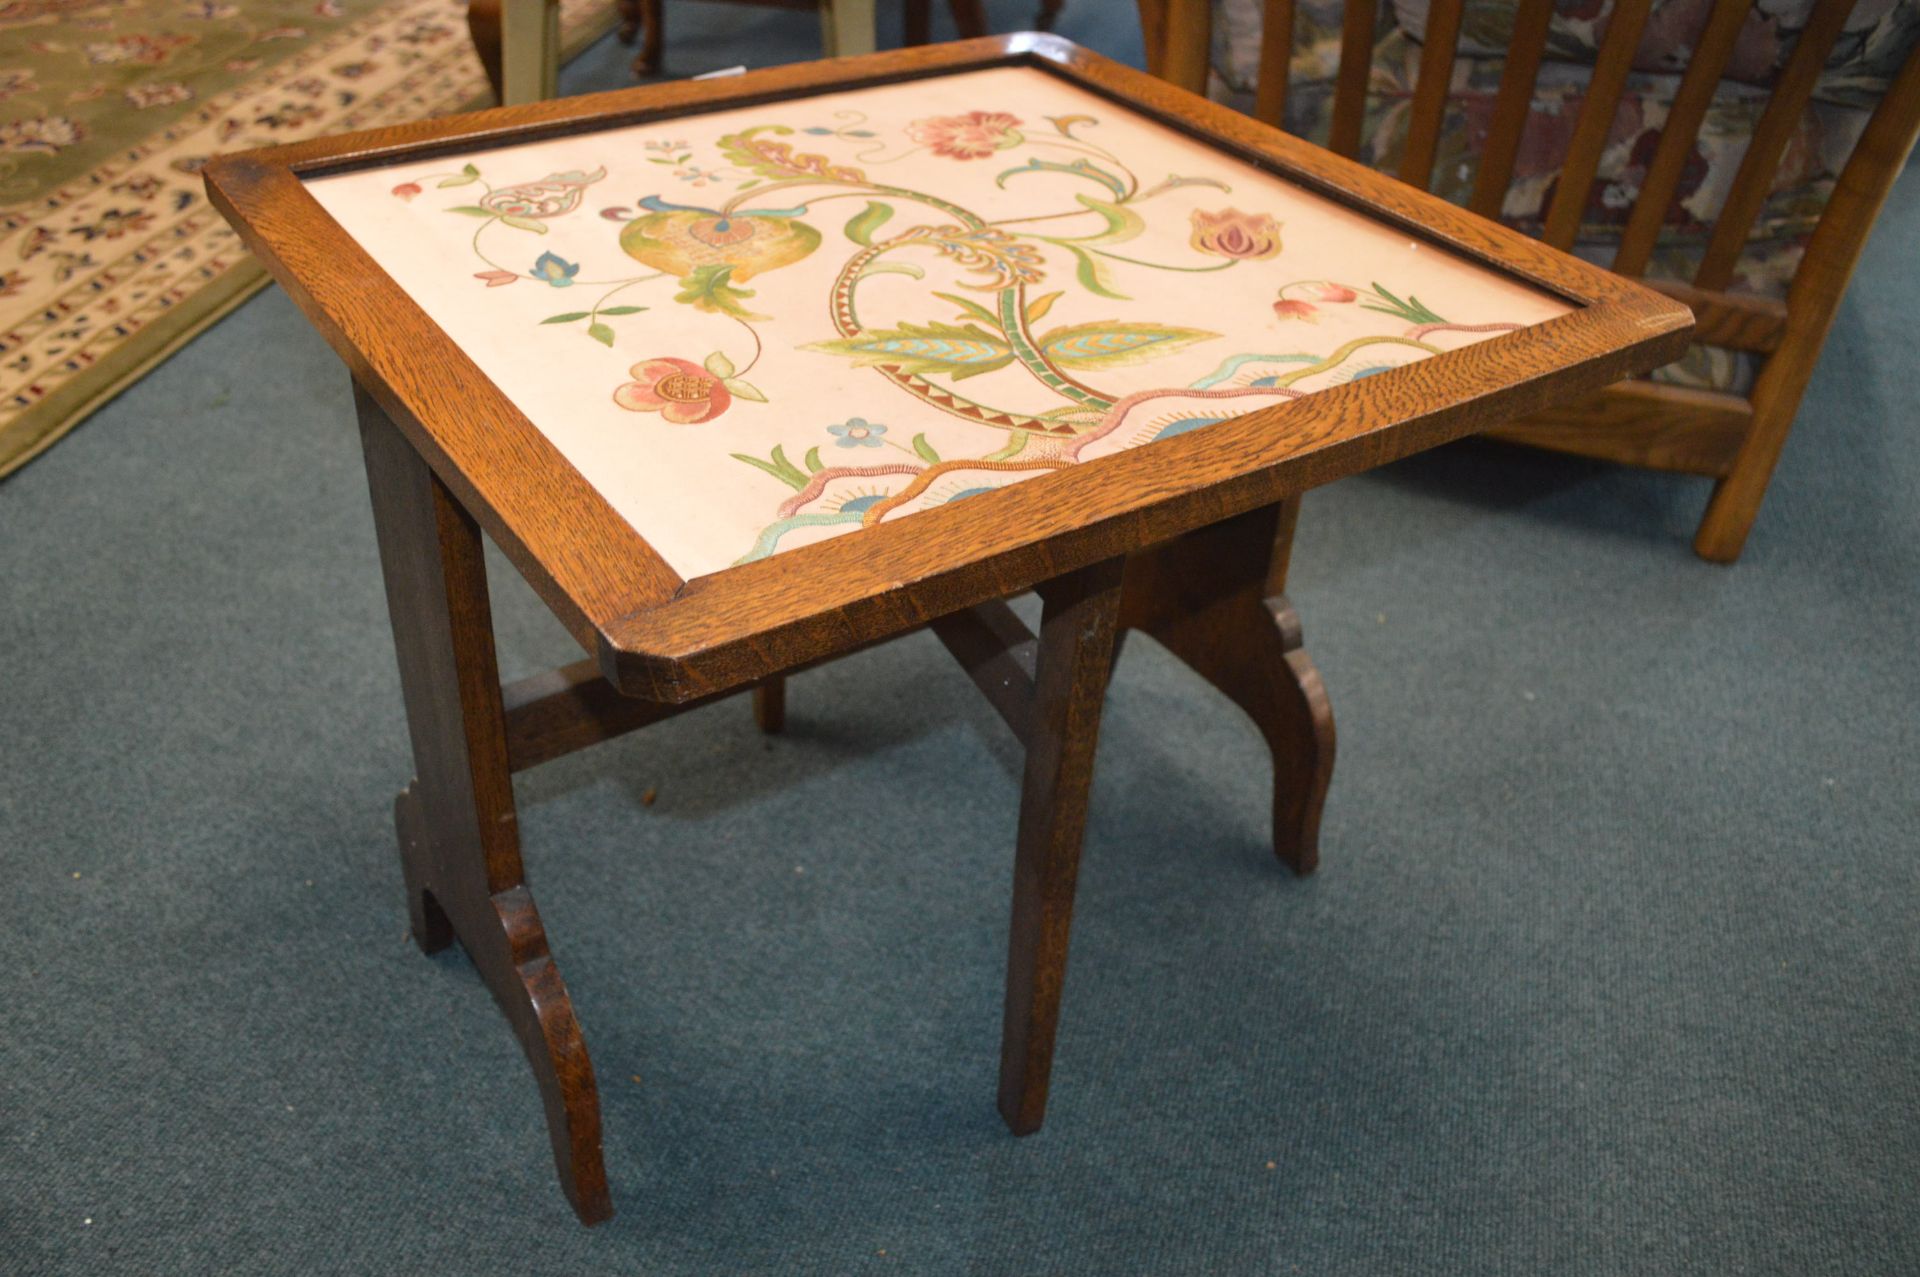 1930's Oak Folding Fire Screen/Table with Embroidered Panel - Image 3 of 3